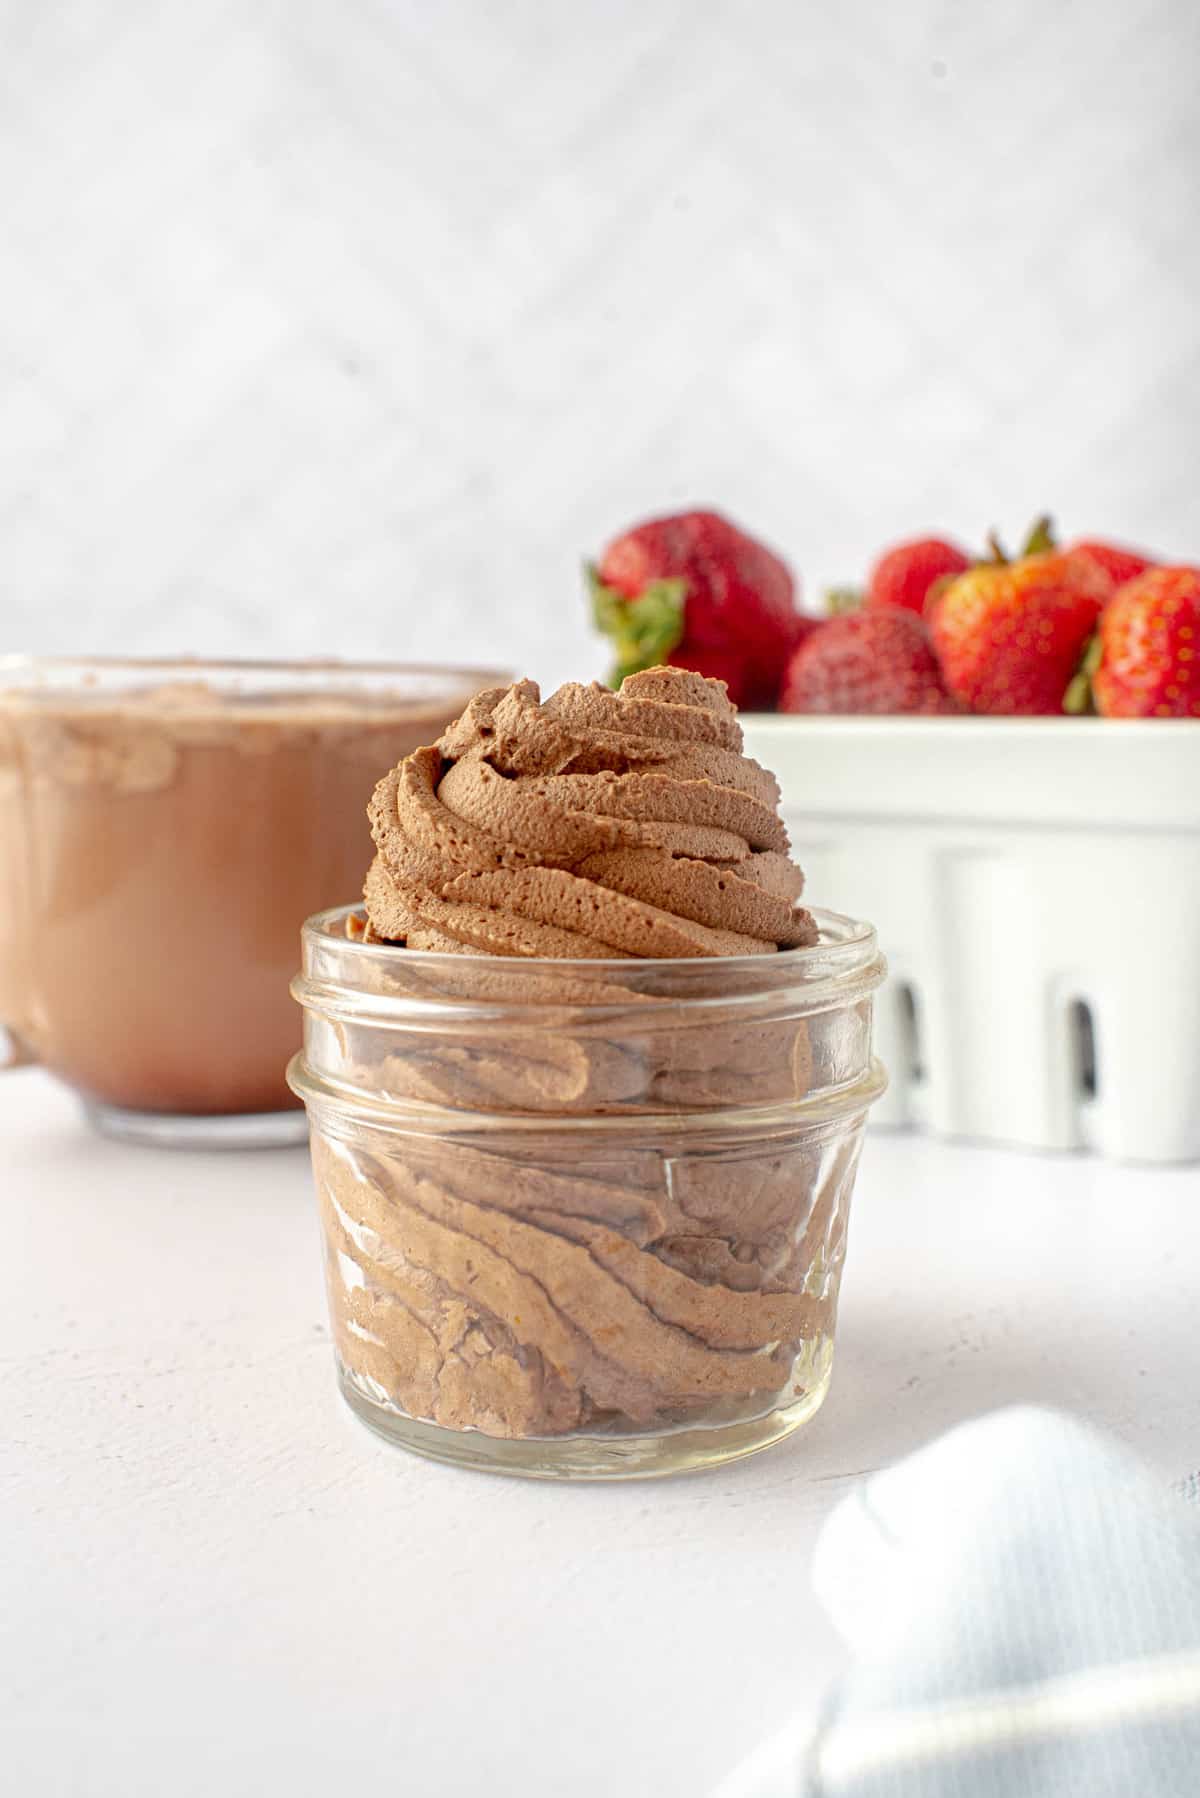 Chocolate whipped topping piped into a small glass jar.